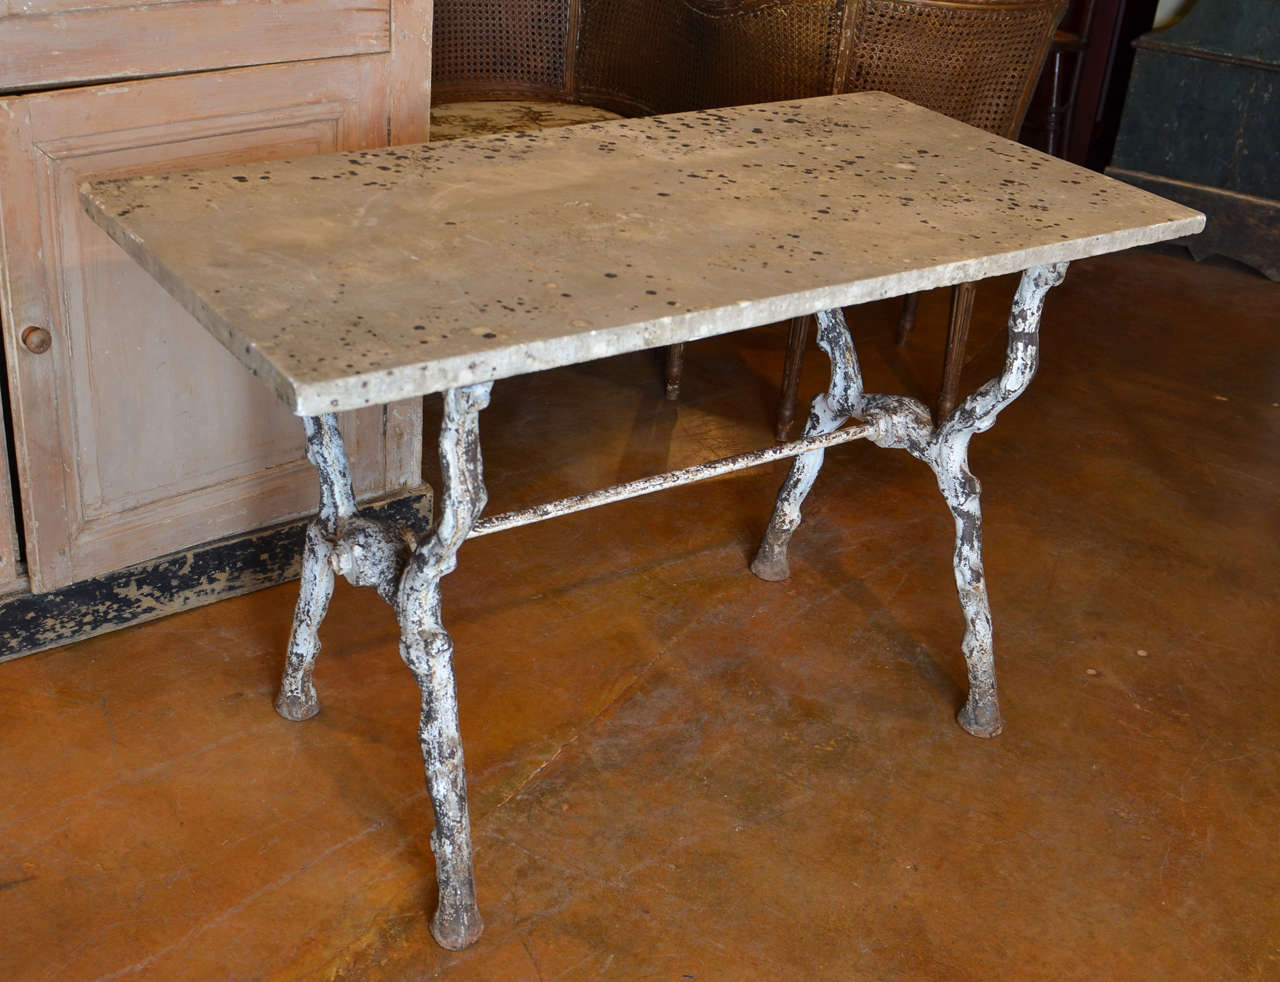 A French marble-top and faux-bois garden table from the 19th century. The table features a simple rectangular marble top over a faux-bois base. The trestle base is made of branch-like legs forming an X-shape and connected to each other with a cross